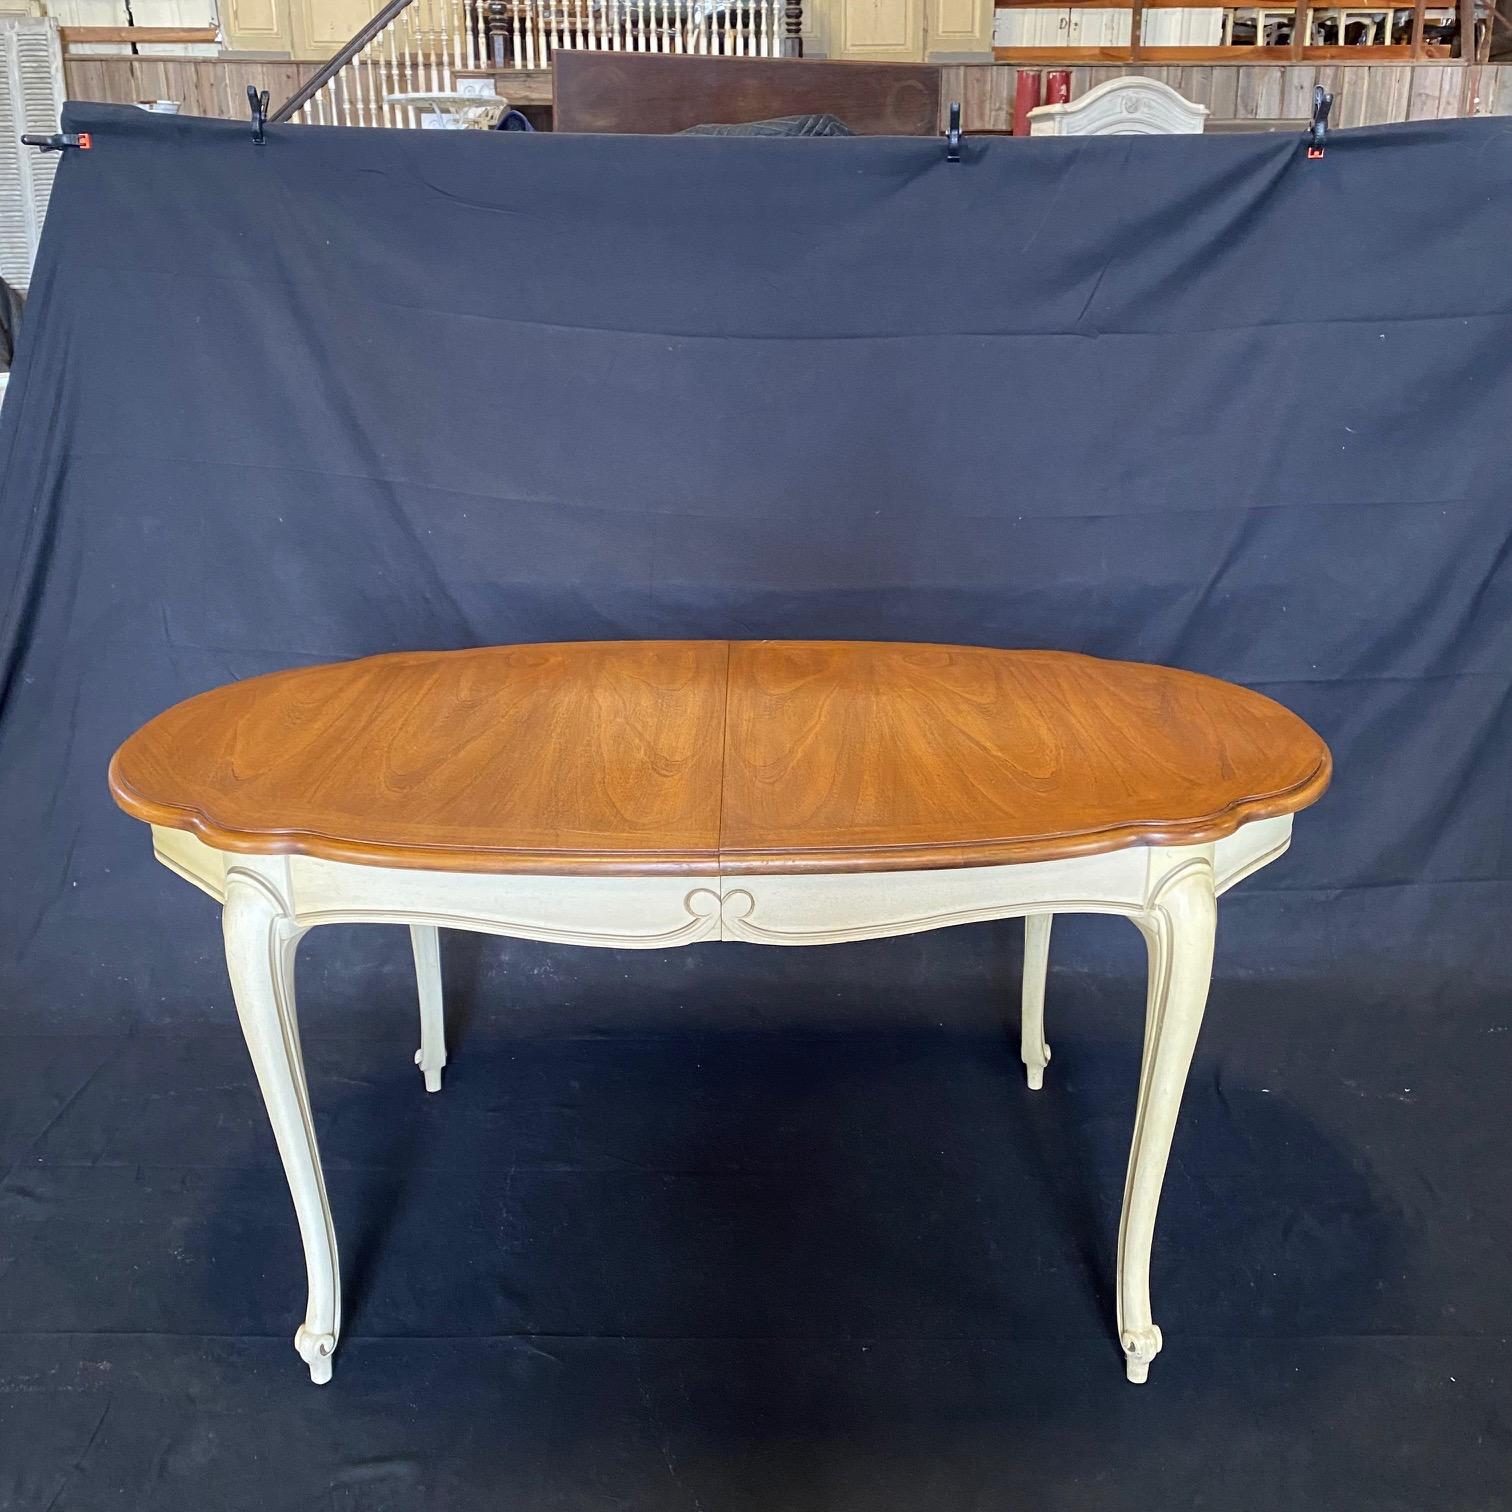 Lovely Louis XV style dining table having gorgeous walnut top with two leaves. The extendable dining table features a wooden top with curved molding details raised on four carved cabriole legs with ivory trim outlines. Open with leaves: 92